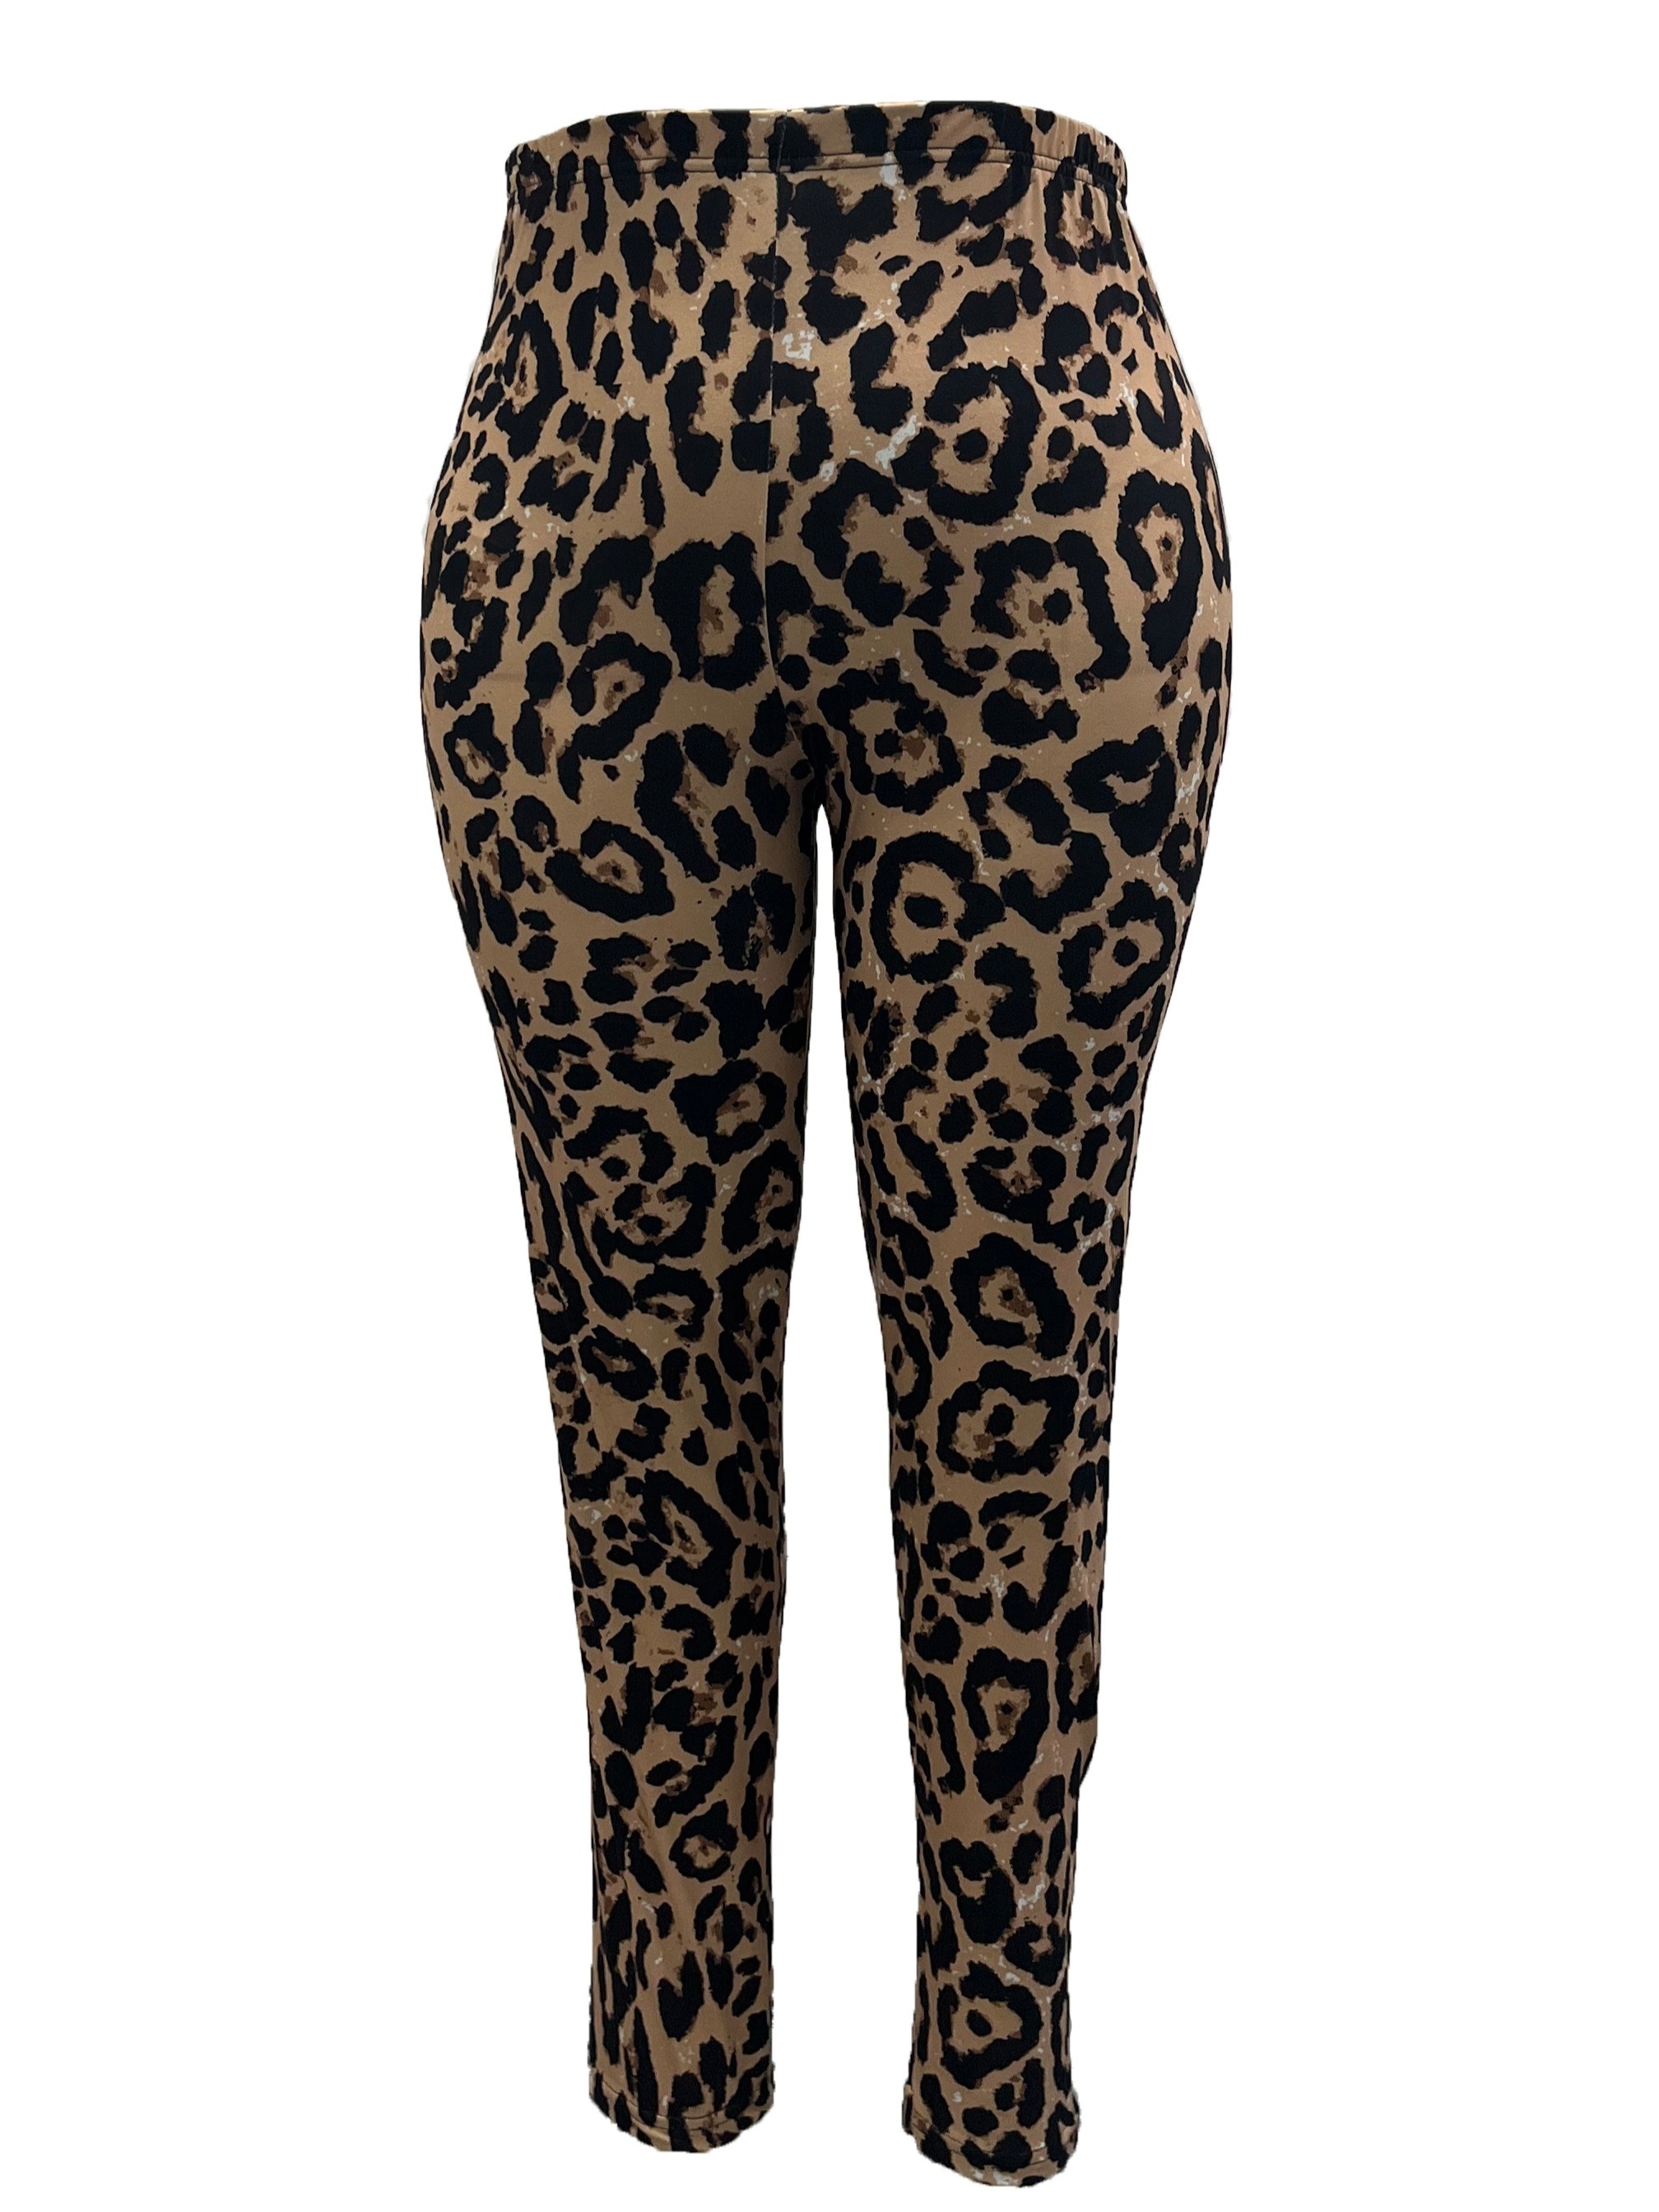  Plus Size Pants for Women Summer High Waisted Stretchy Cropped  Pants Casual Trendy Legging Leopard Printed Bodycon Pants : Sports &  Outdoors